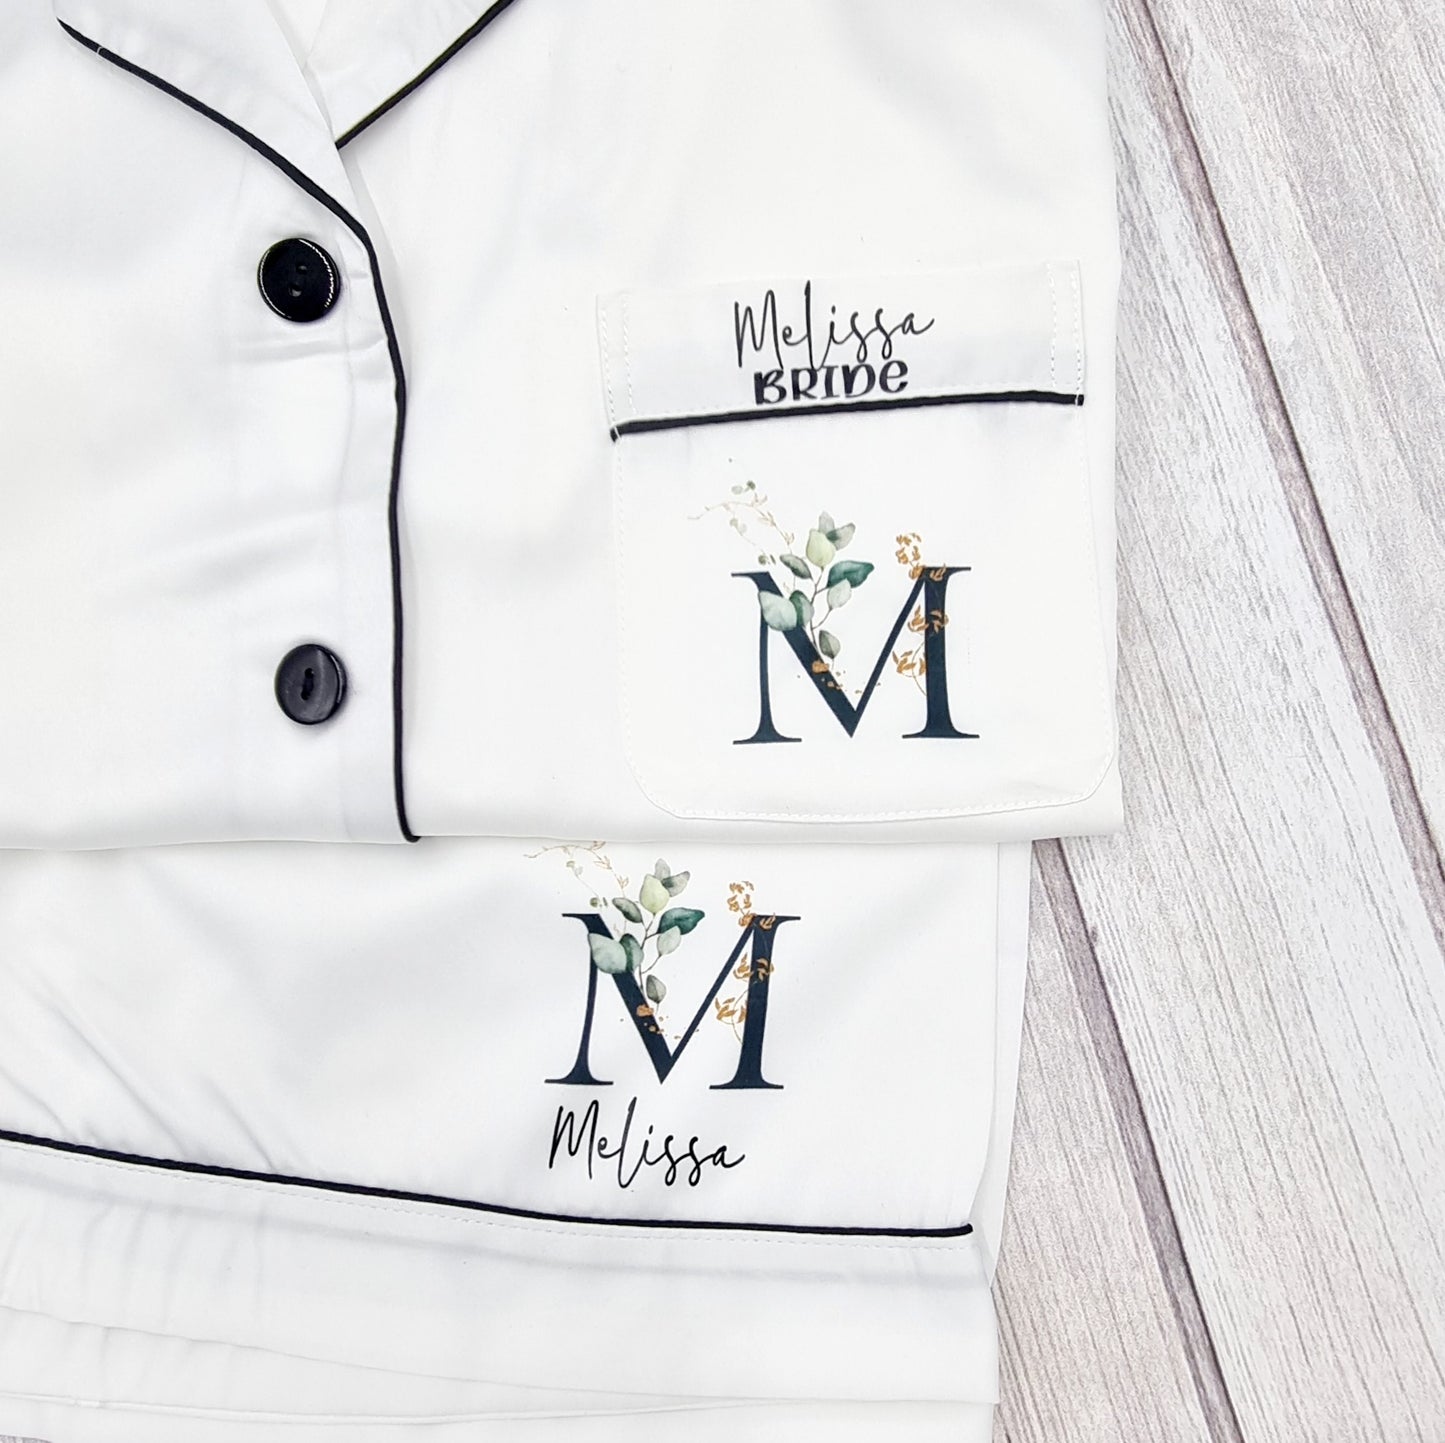 White long sleeve and long bottoms pyjamas with beautiful initial design on pocket with name and title from HanaLee Studios